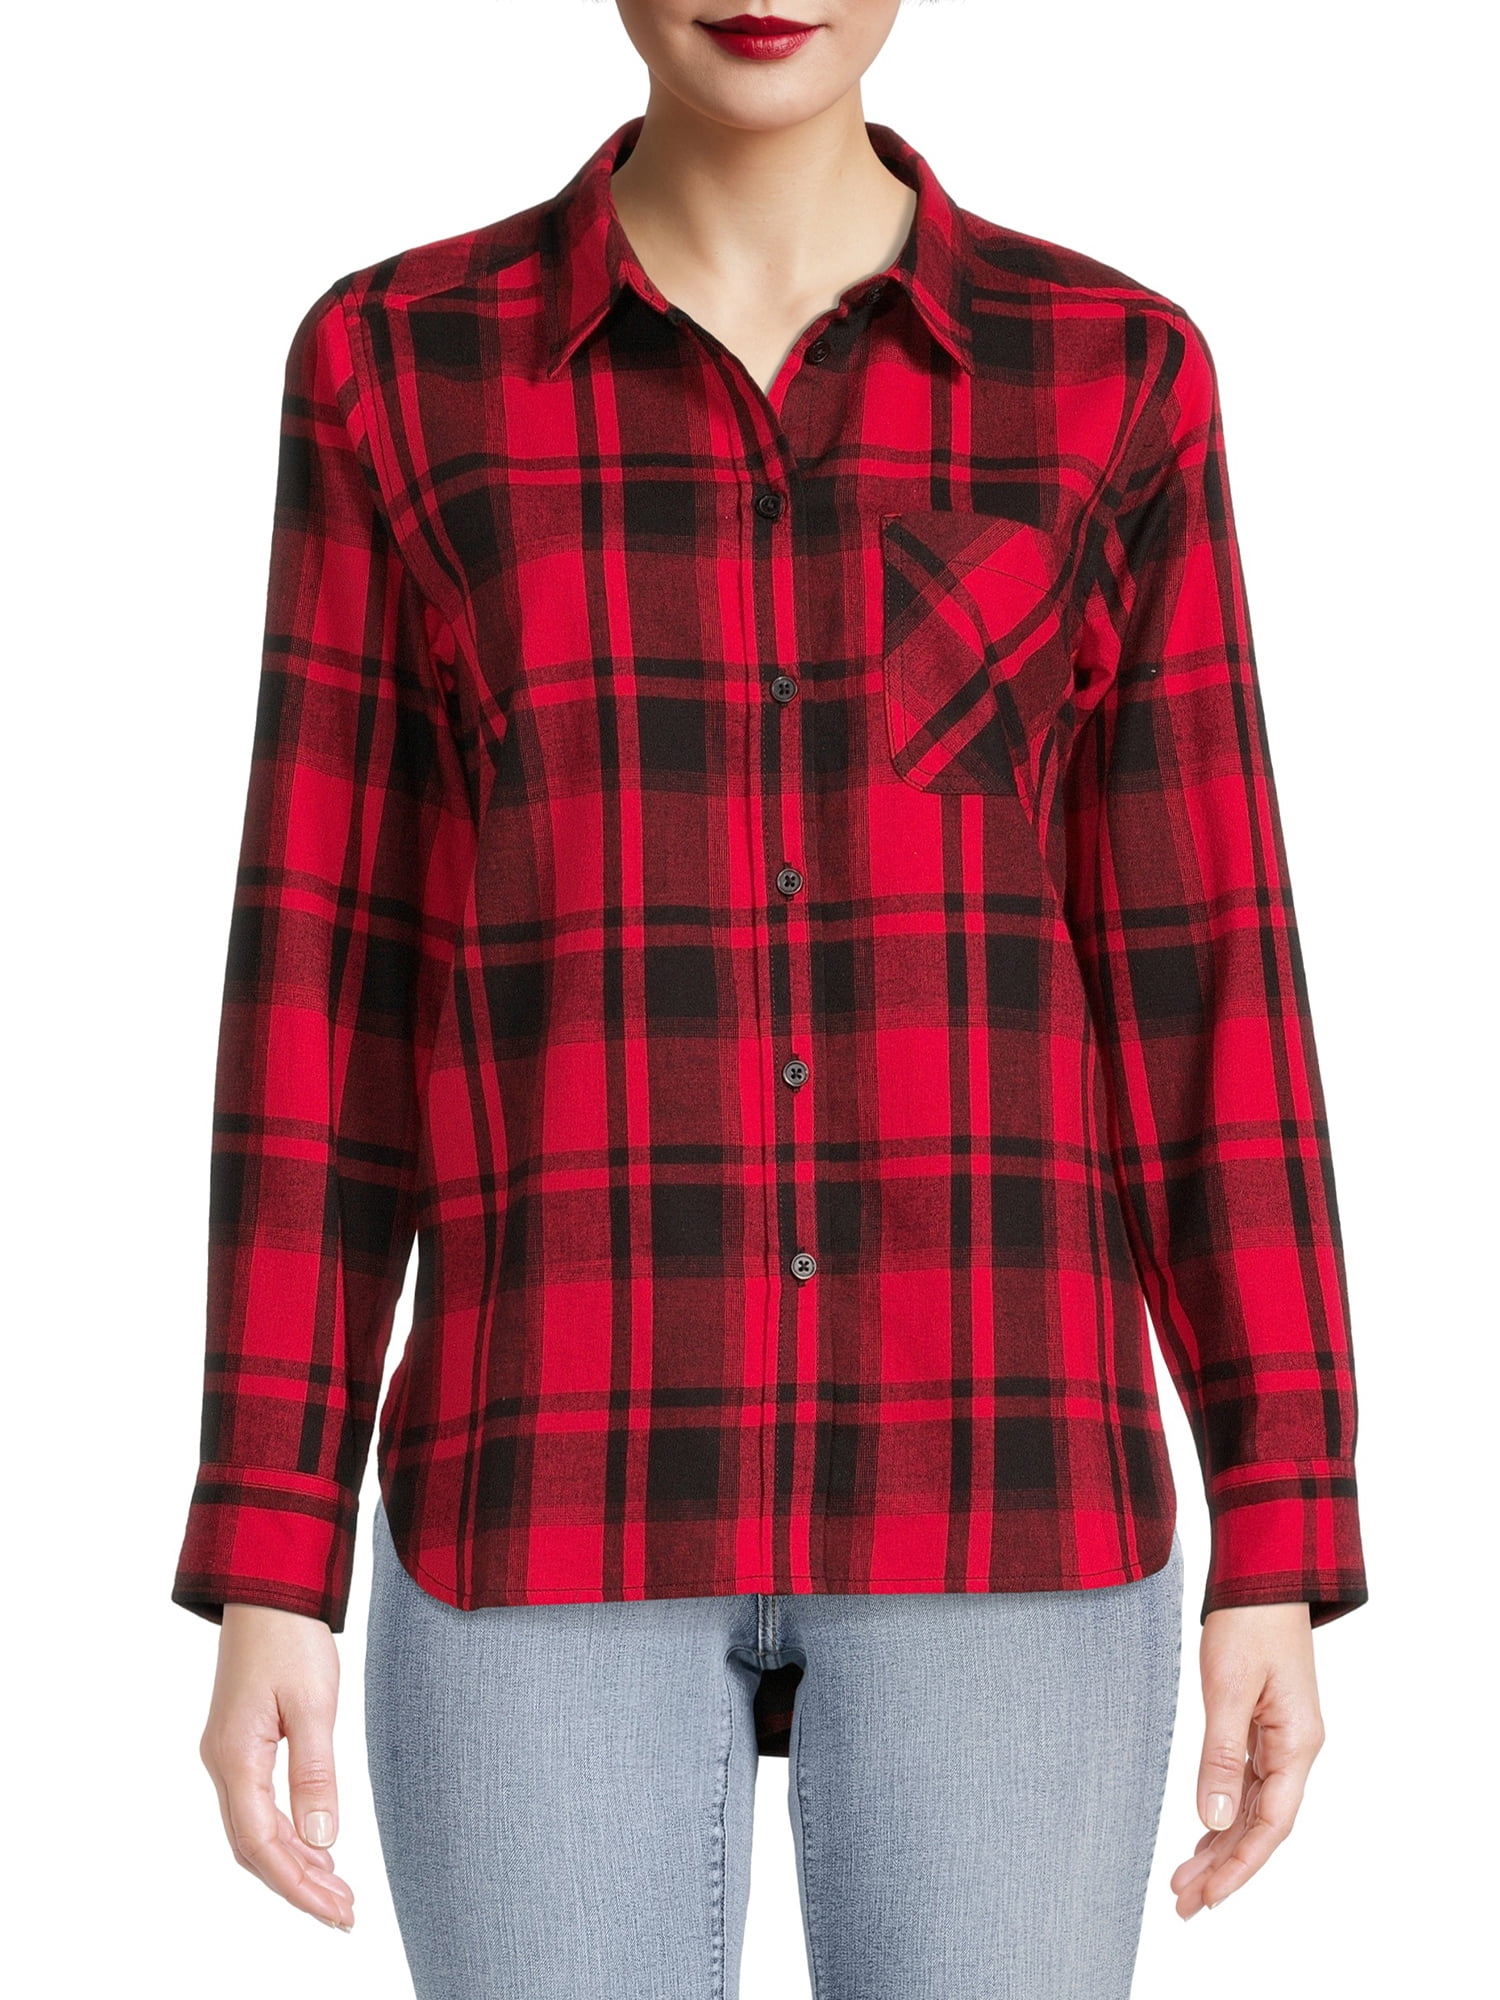 Time and Tru Women's Flannel Shirt, Sizes Xs-3xl, Size: Large, Red